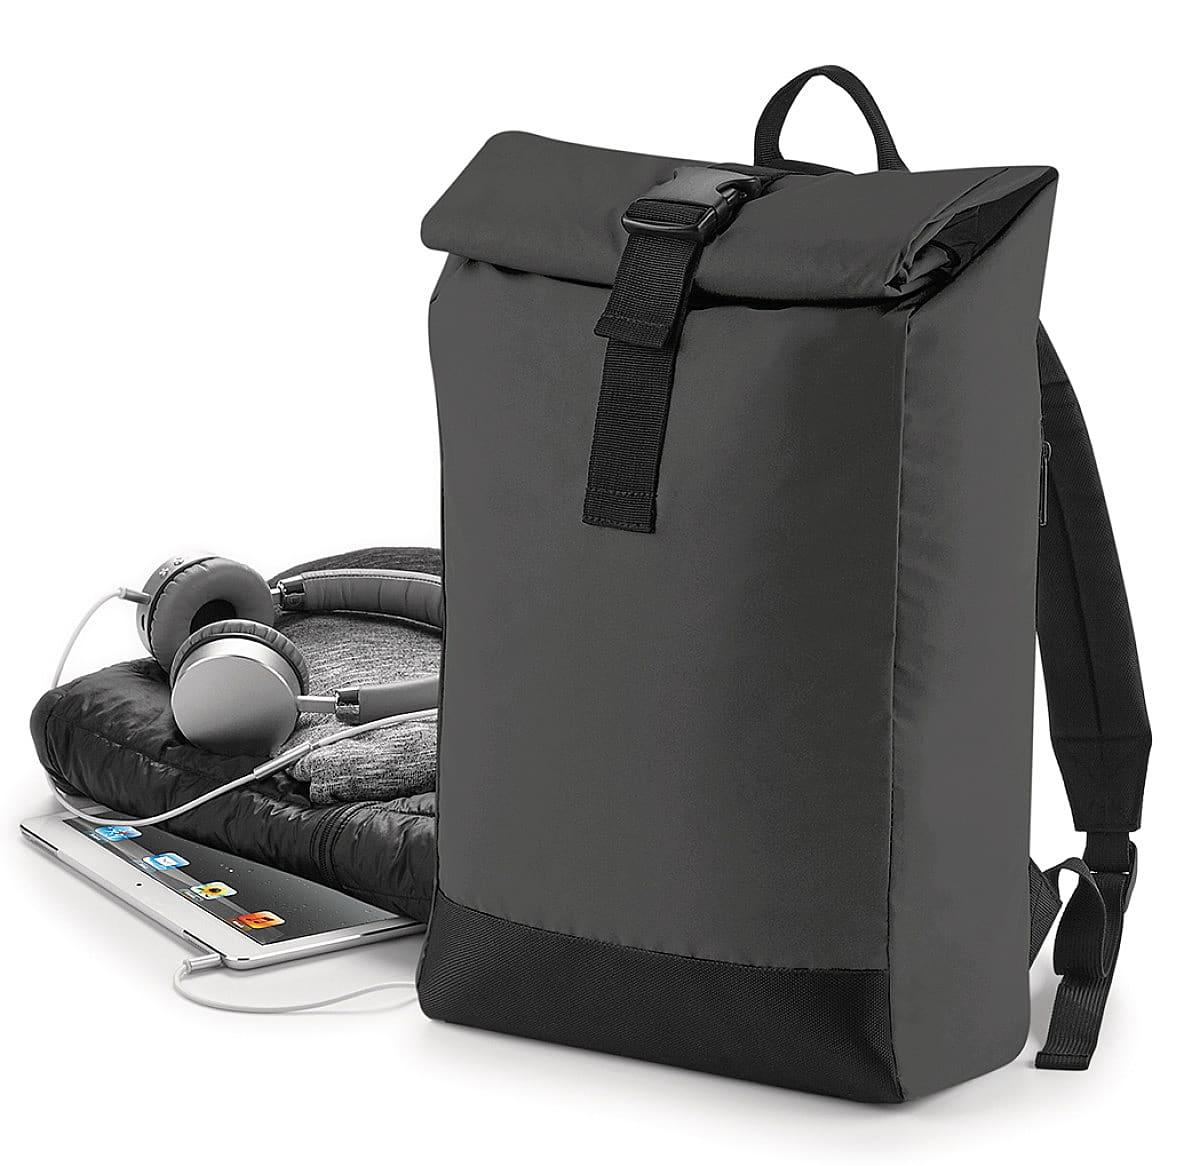 Bagbase Reflective Roll Top Backpack in Black / Reflective (Product Code: BG138)